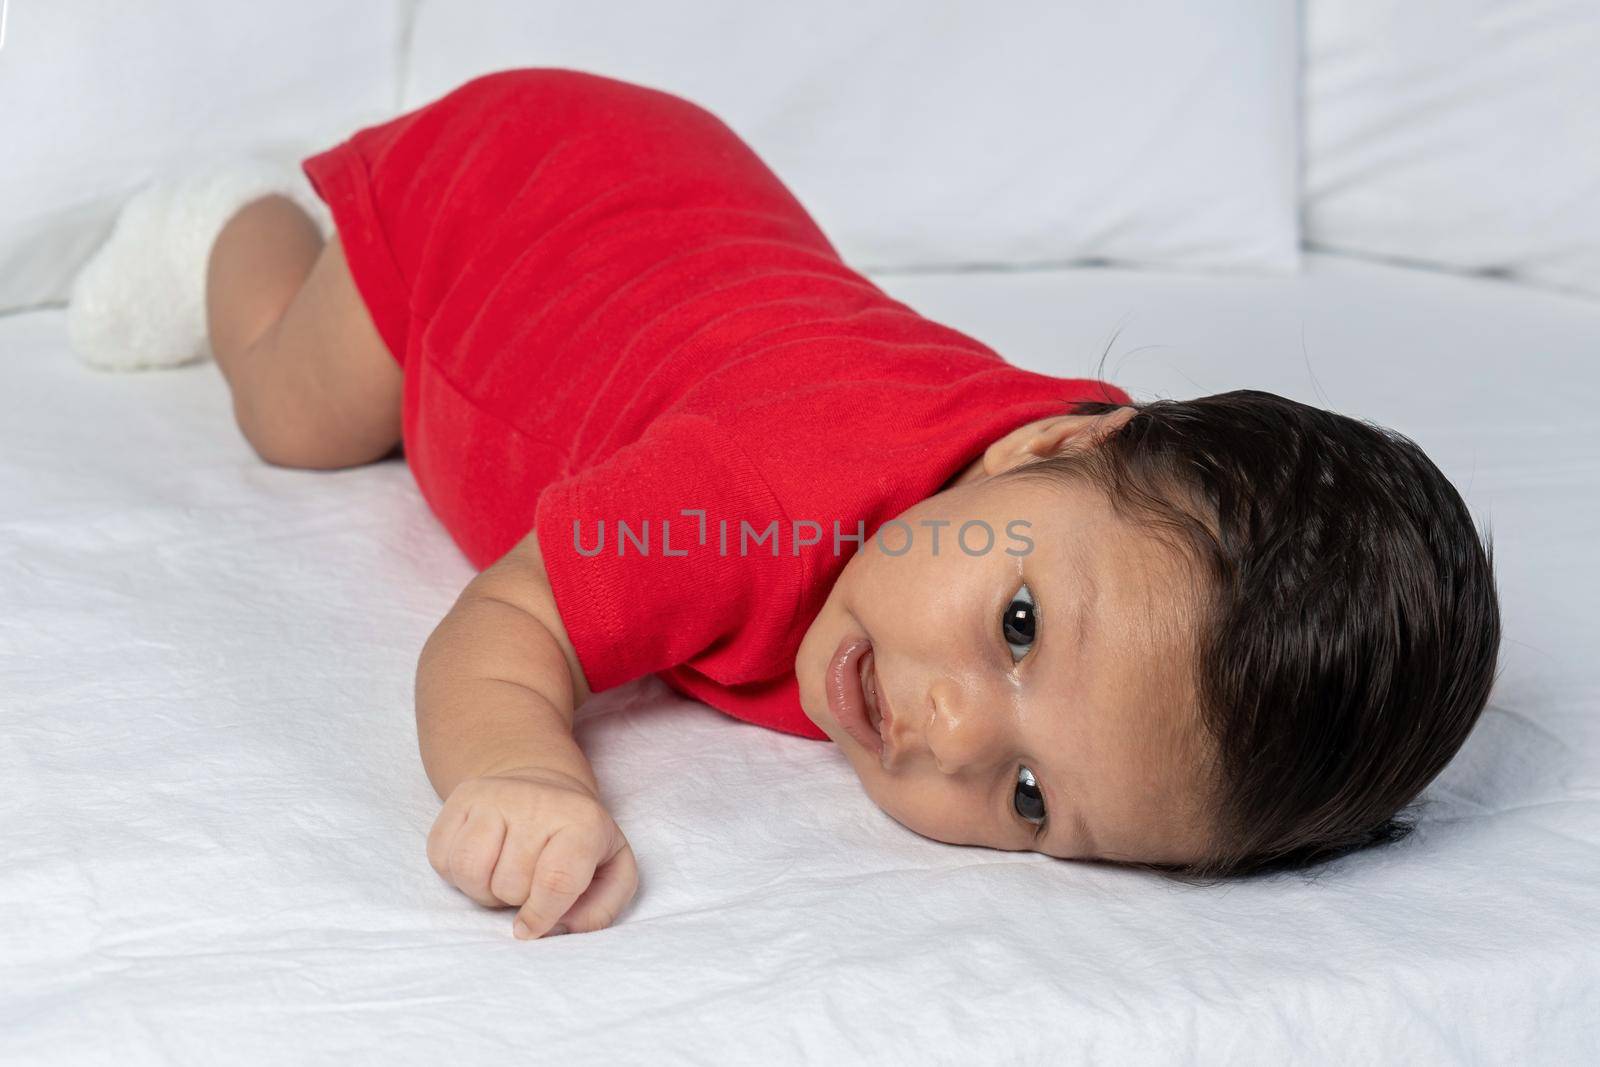 Infant lying on his stomach wearing red clothes